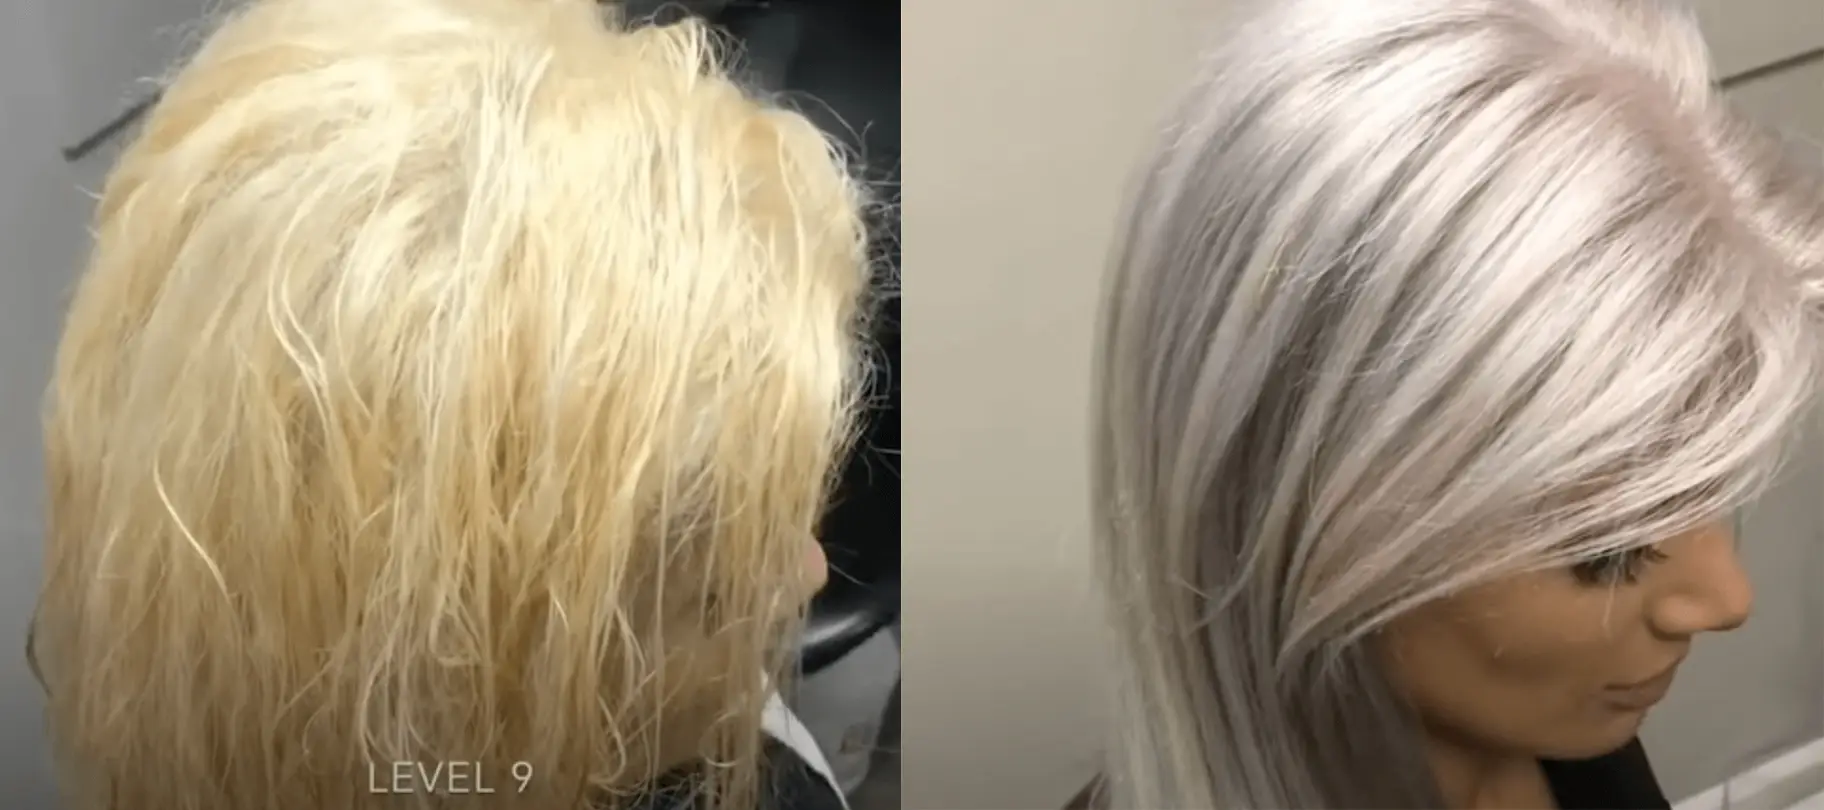 6. Toning Blonde Hair Shades vs. Regular Hair Dye: What's the Difference? - wide 9